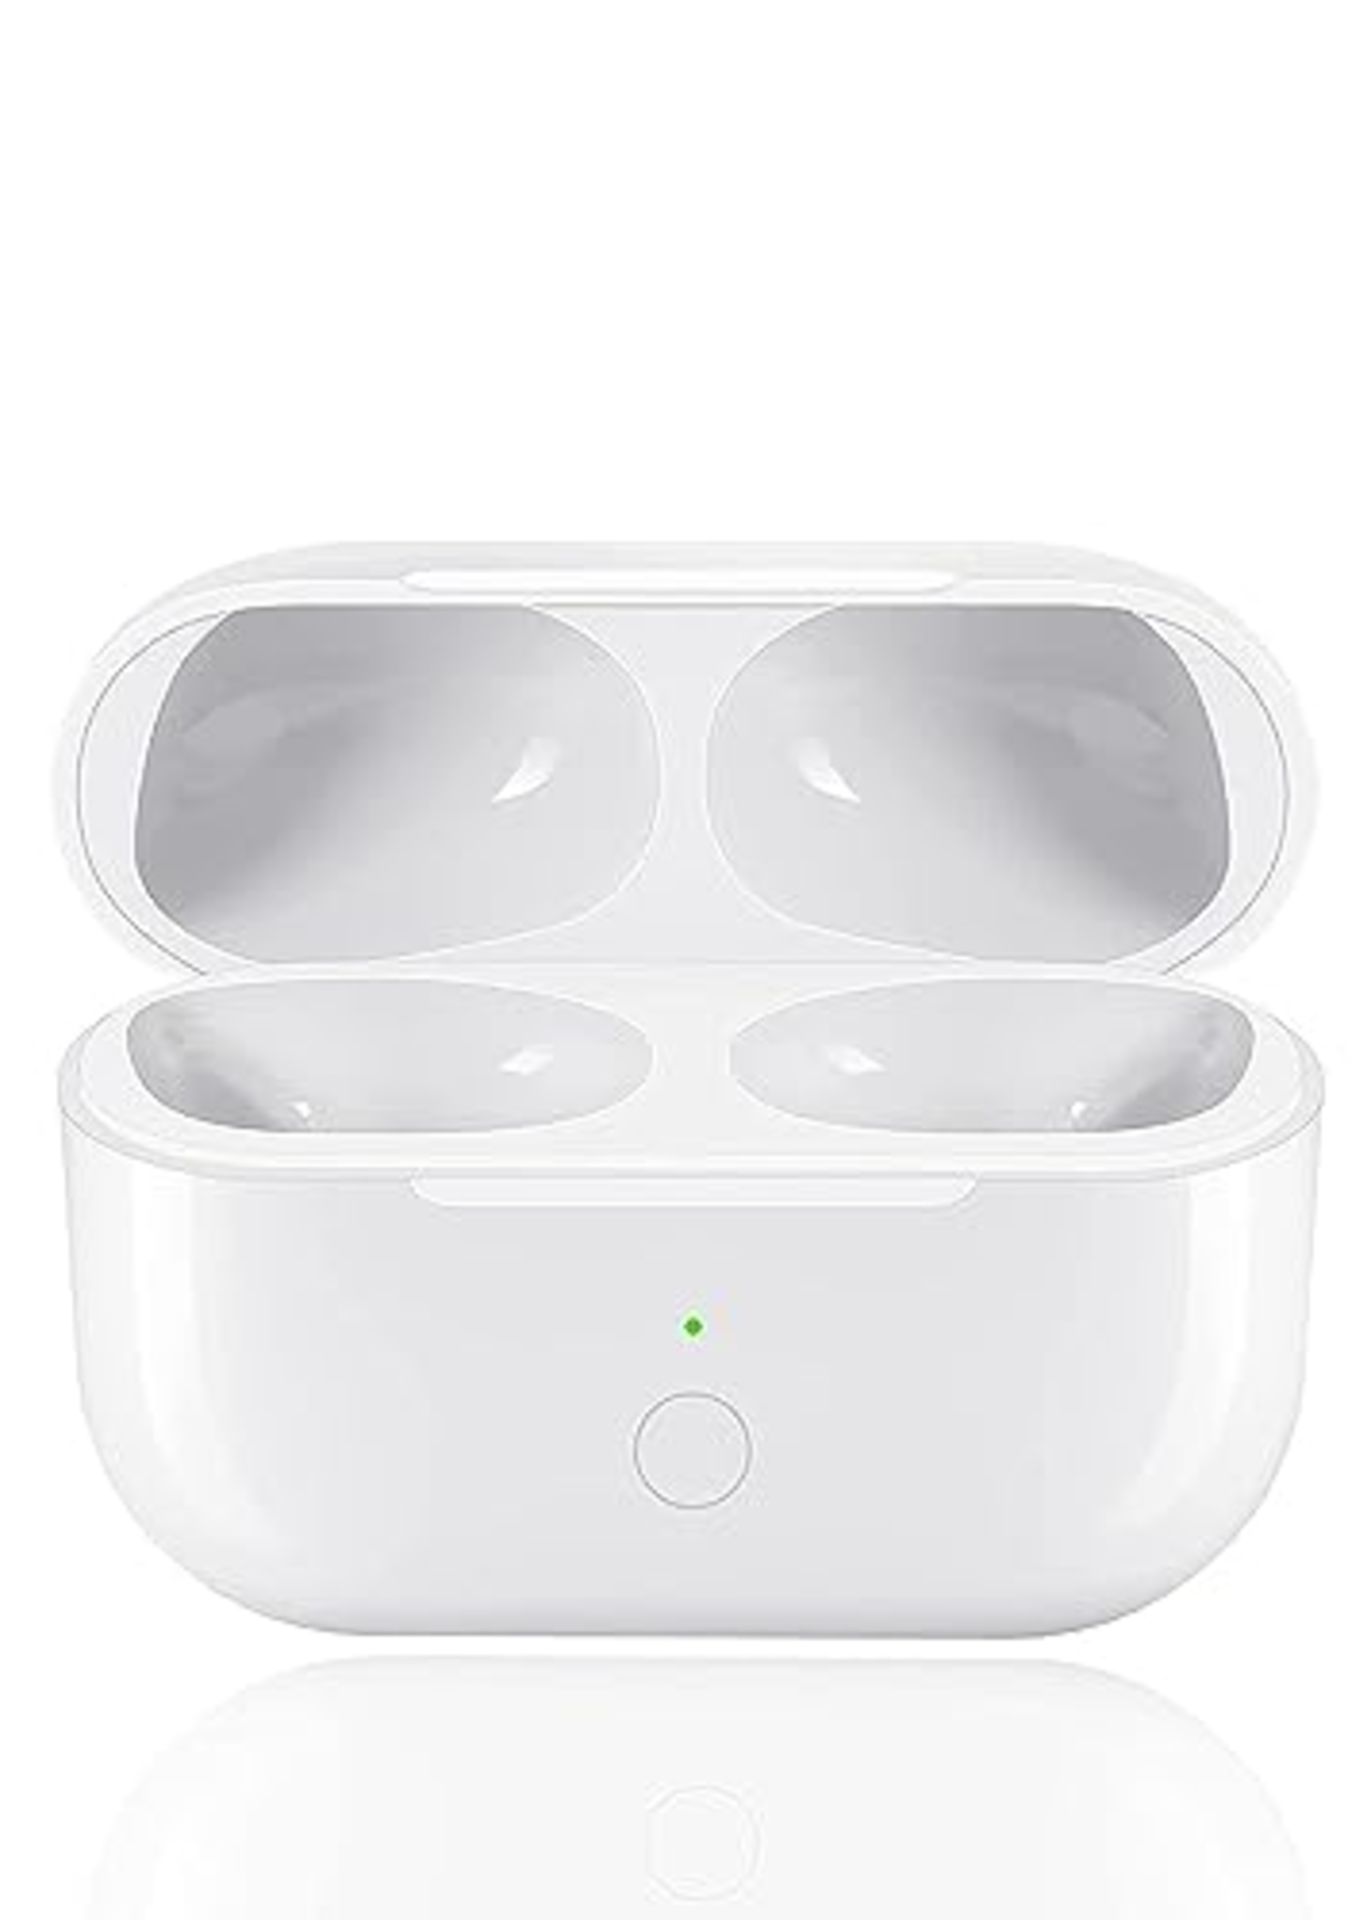 Wireless Charging Case for AirPods Pro 1 and AirPods Pro 2, Replacement Charging Case - Image 4 of 6